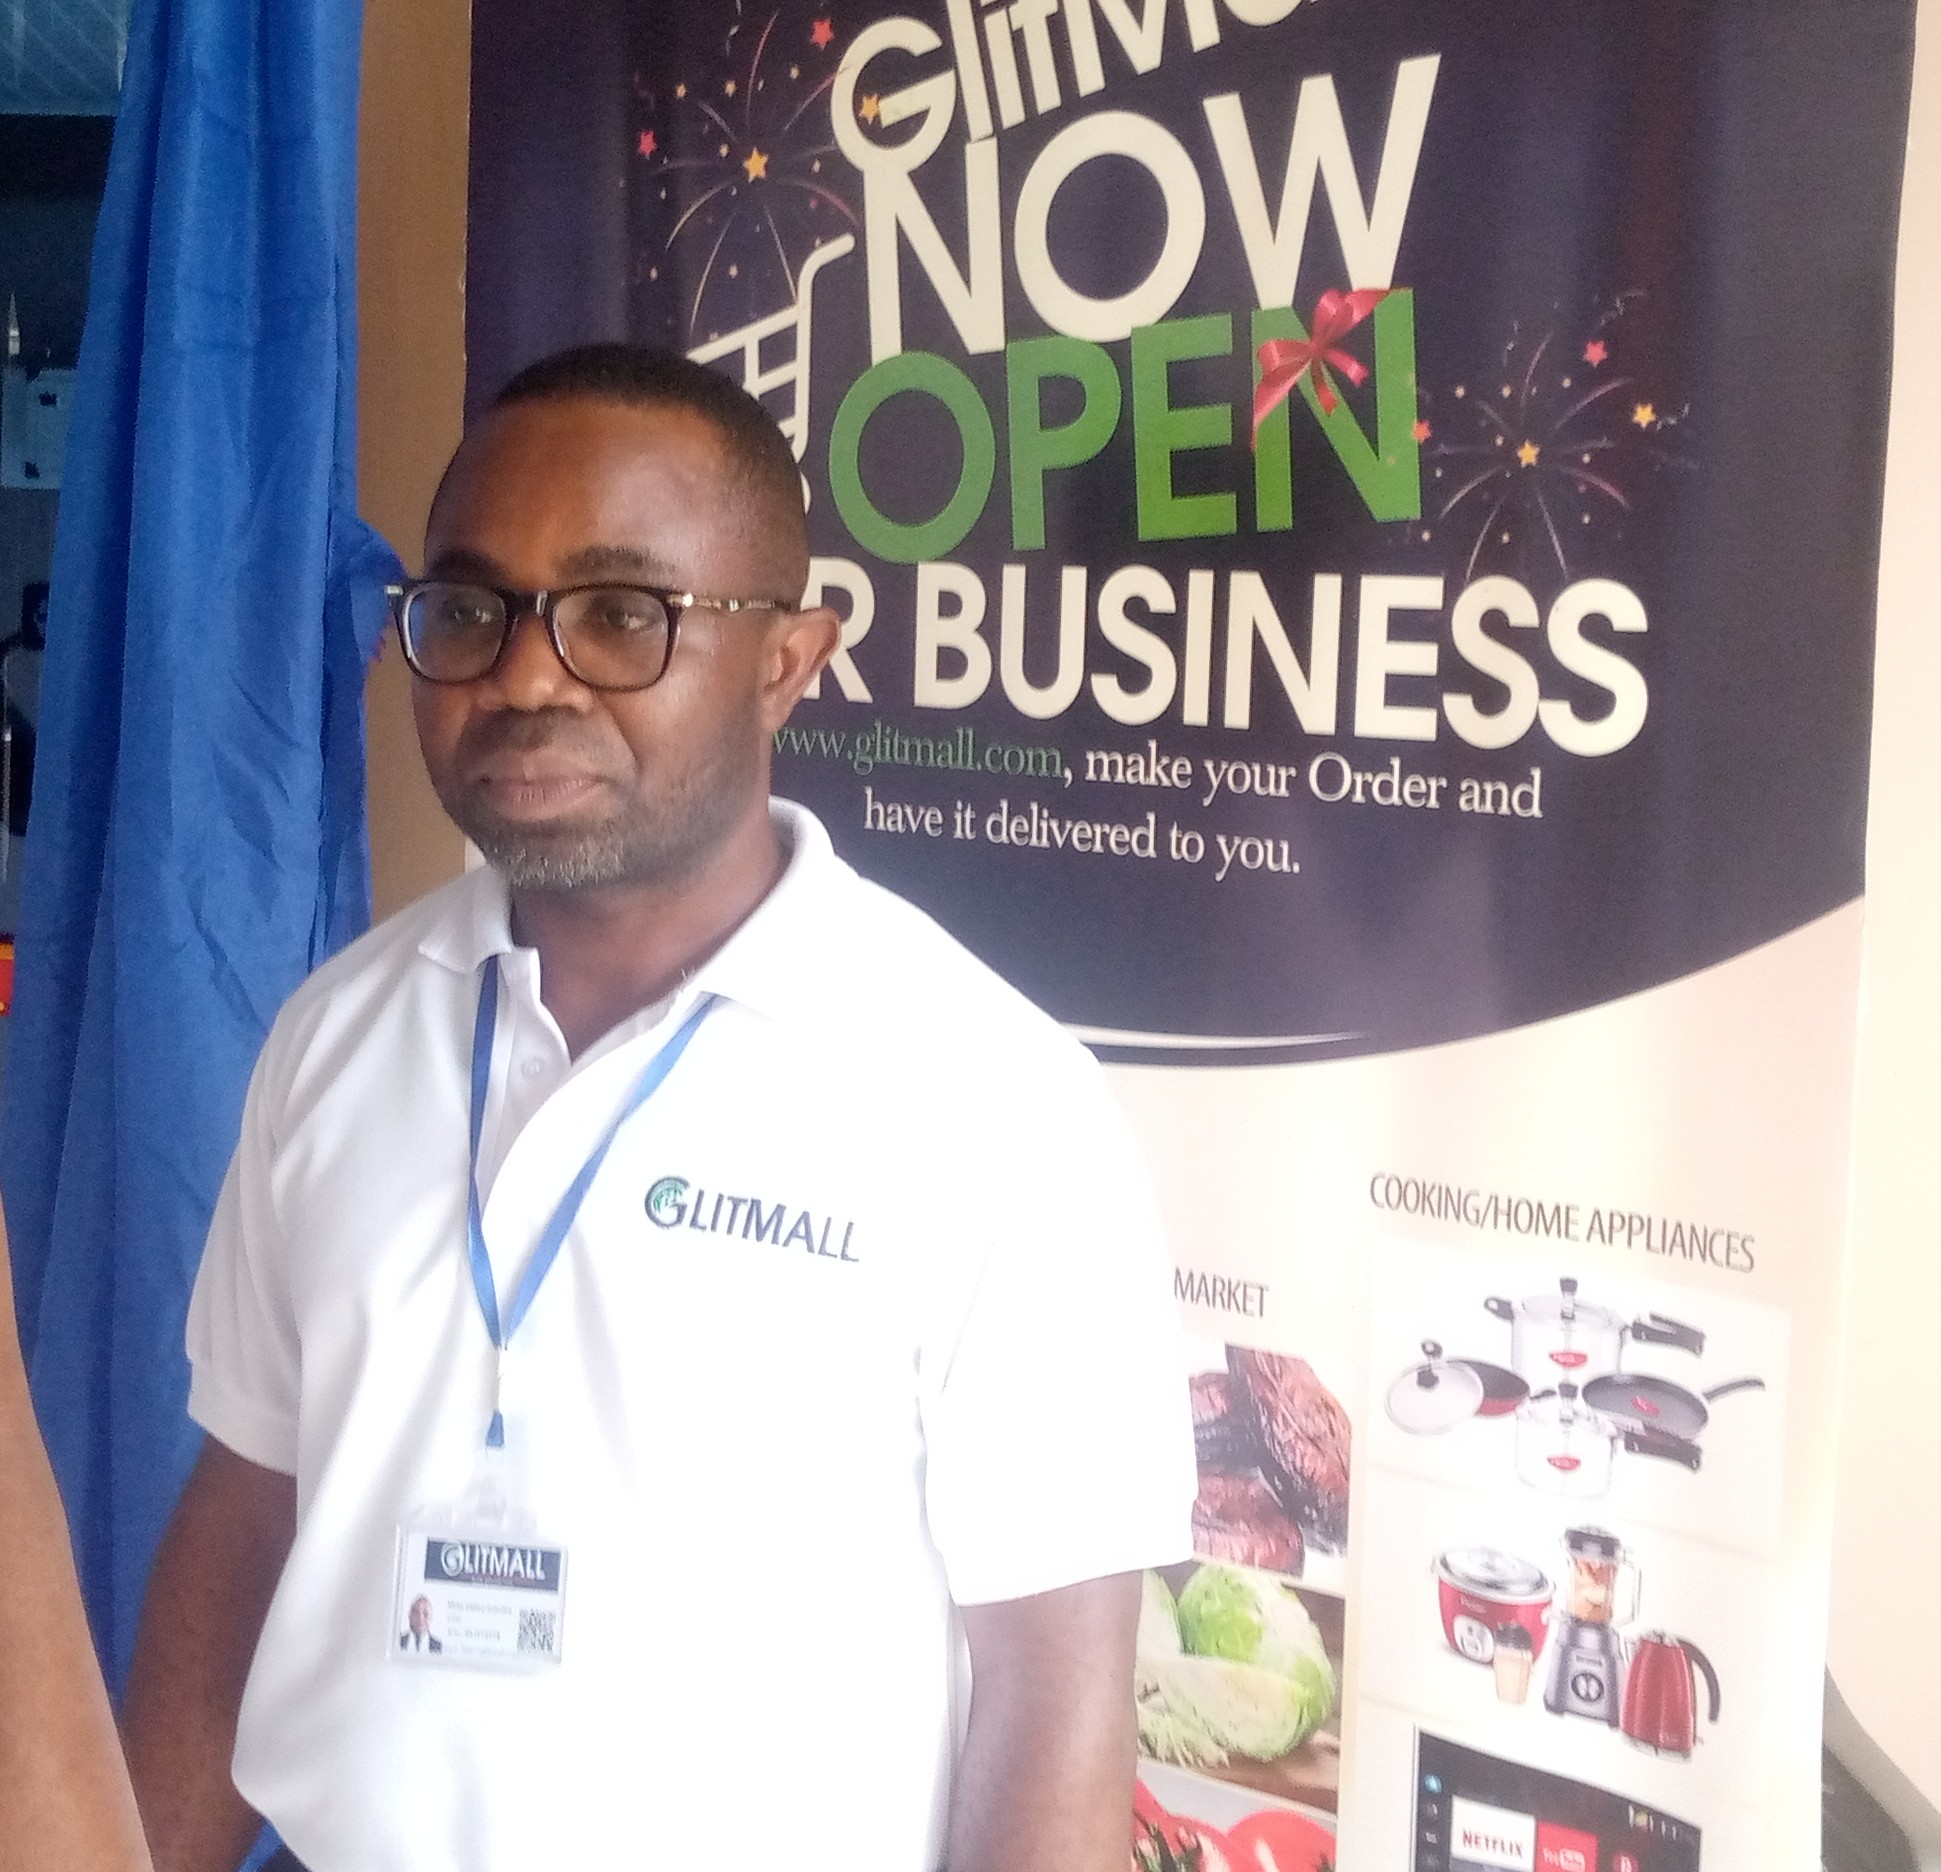 Glitmall To Create Digital Jobs For The Youth-Co-founder Reveals